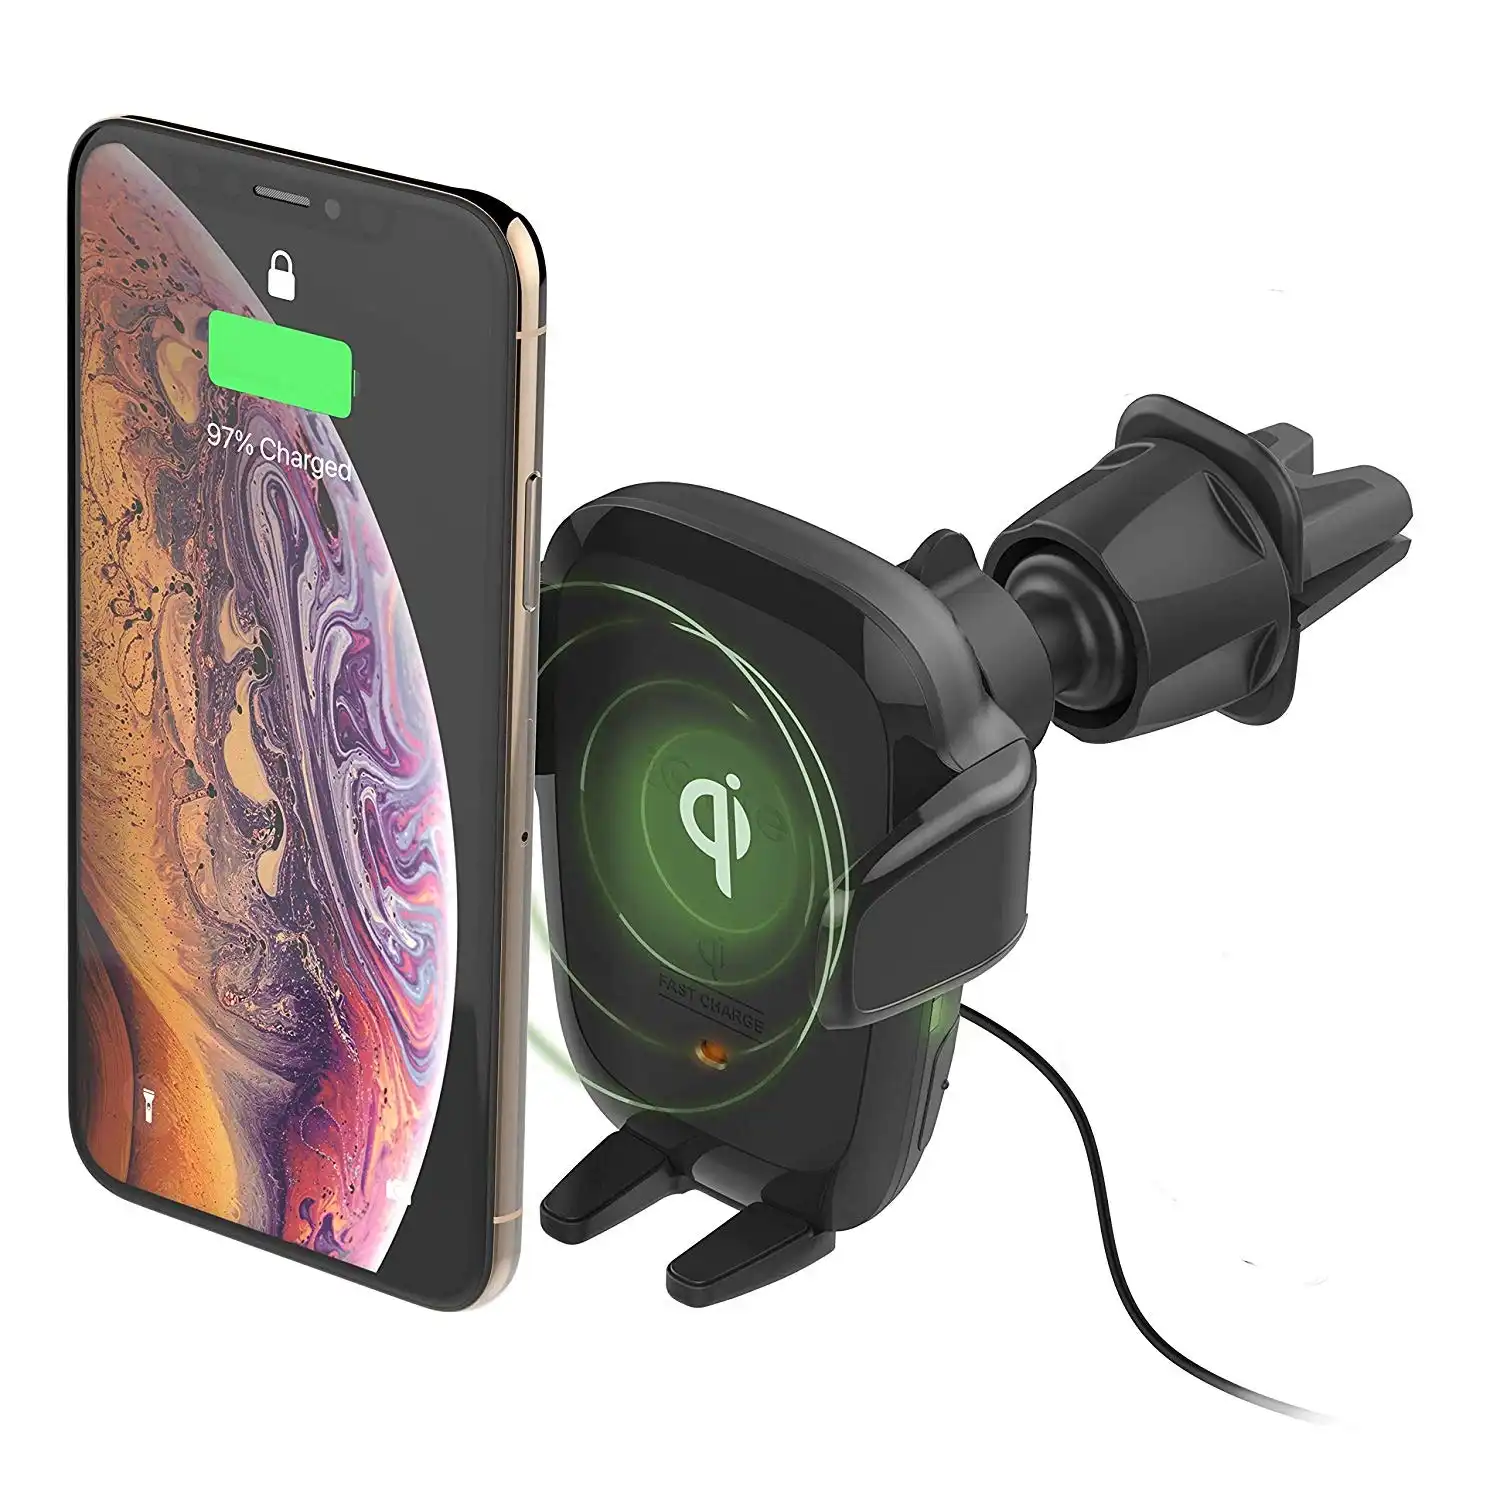 iOttie Wireless Car Charger Auto Sense Qi Charging Automatic Clamping CD + Air Vent Combo Phone Mount for iPhone, Samsung Galaxy, Huawei, LG, Smartpho